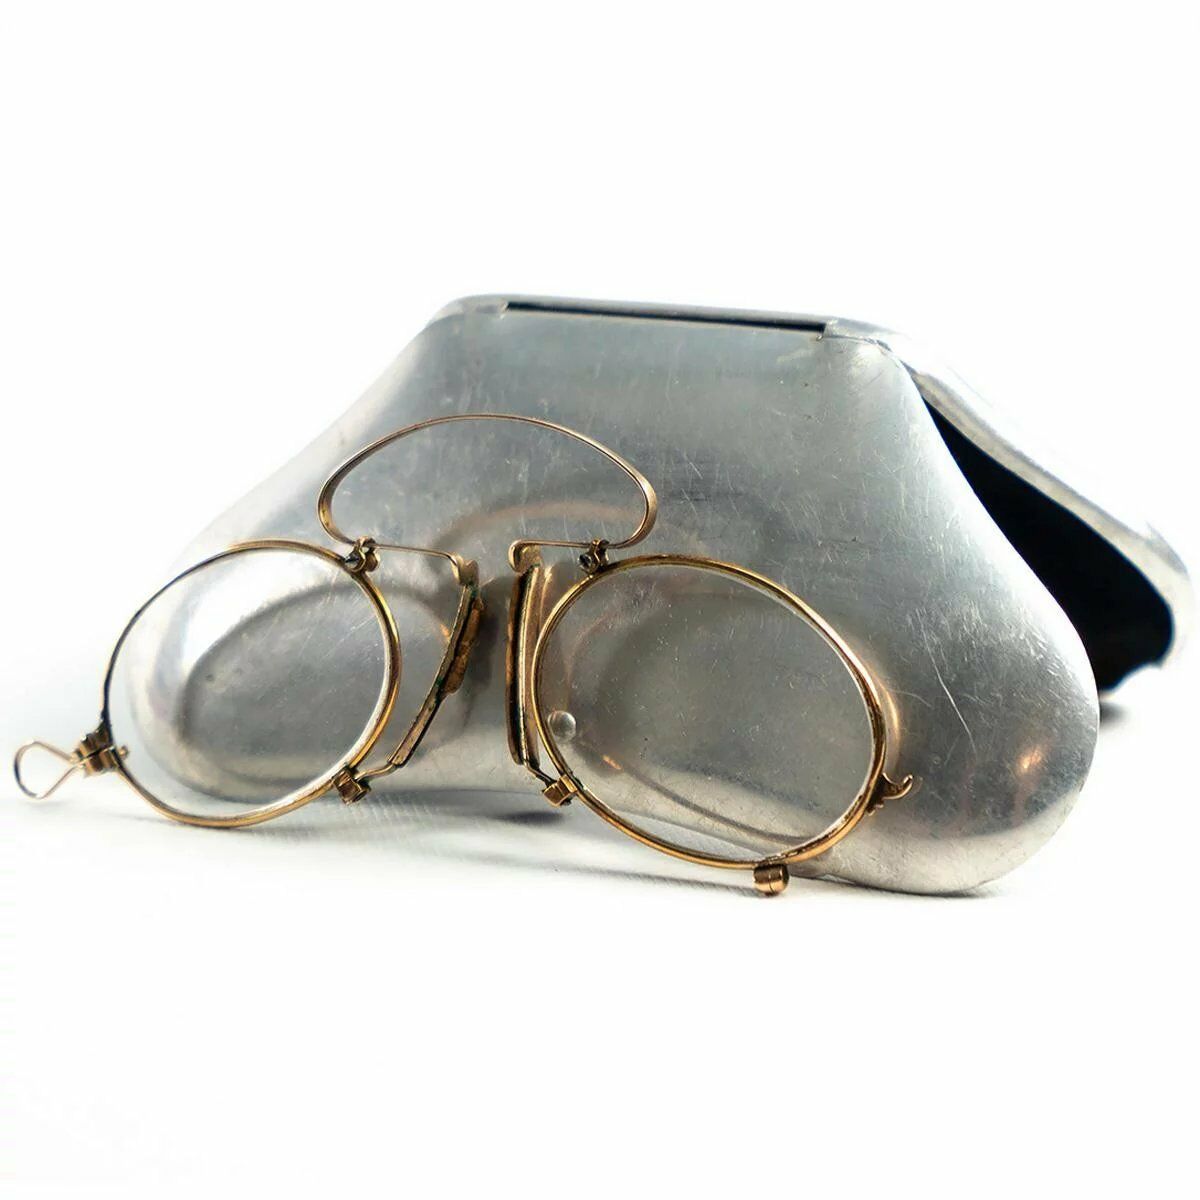 Antique 14K Gold Folding Spectacles, Pince Nez Reading Glasses and